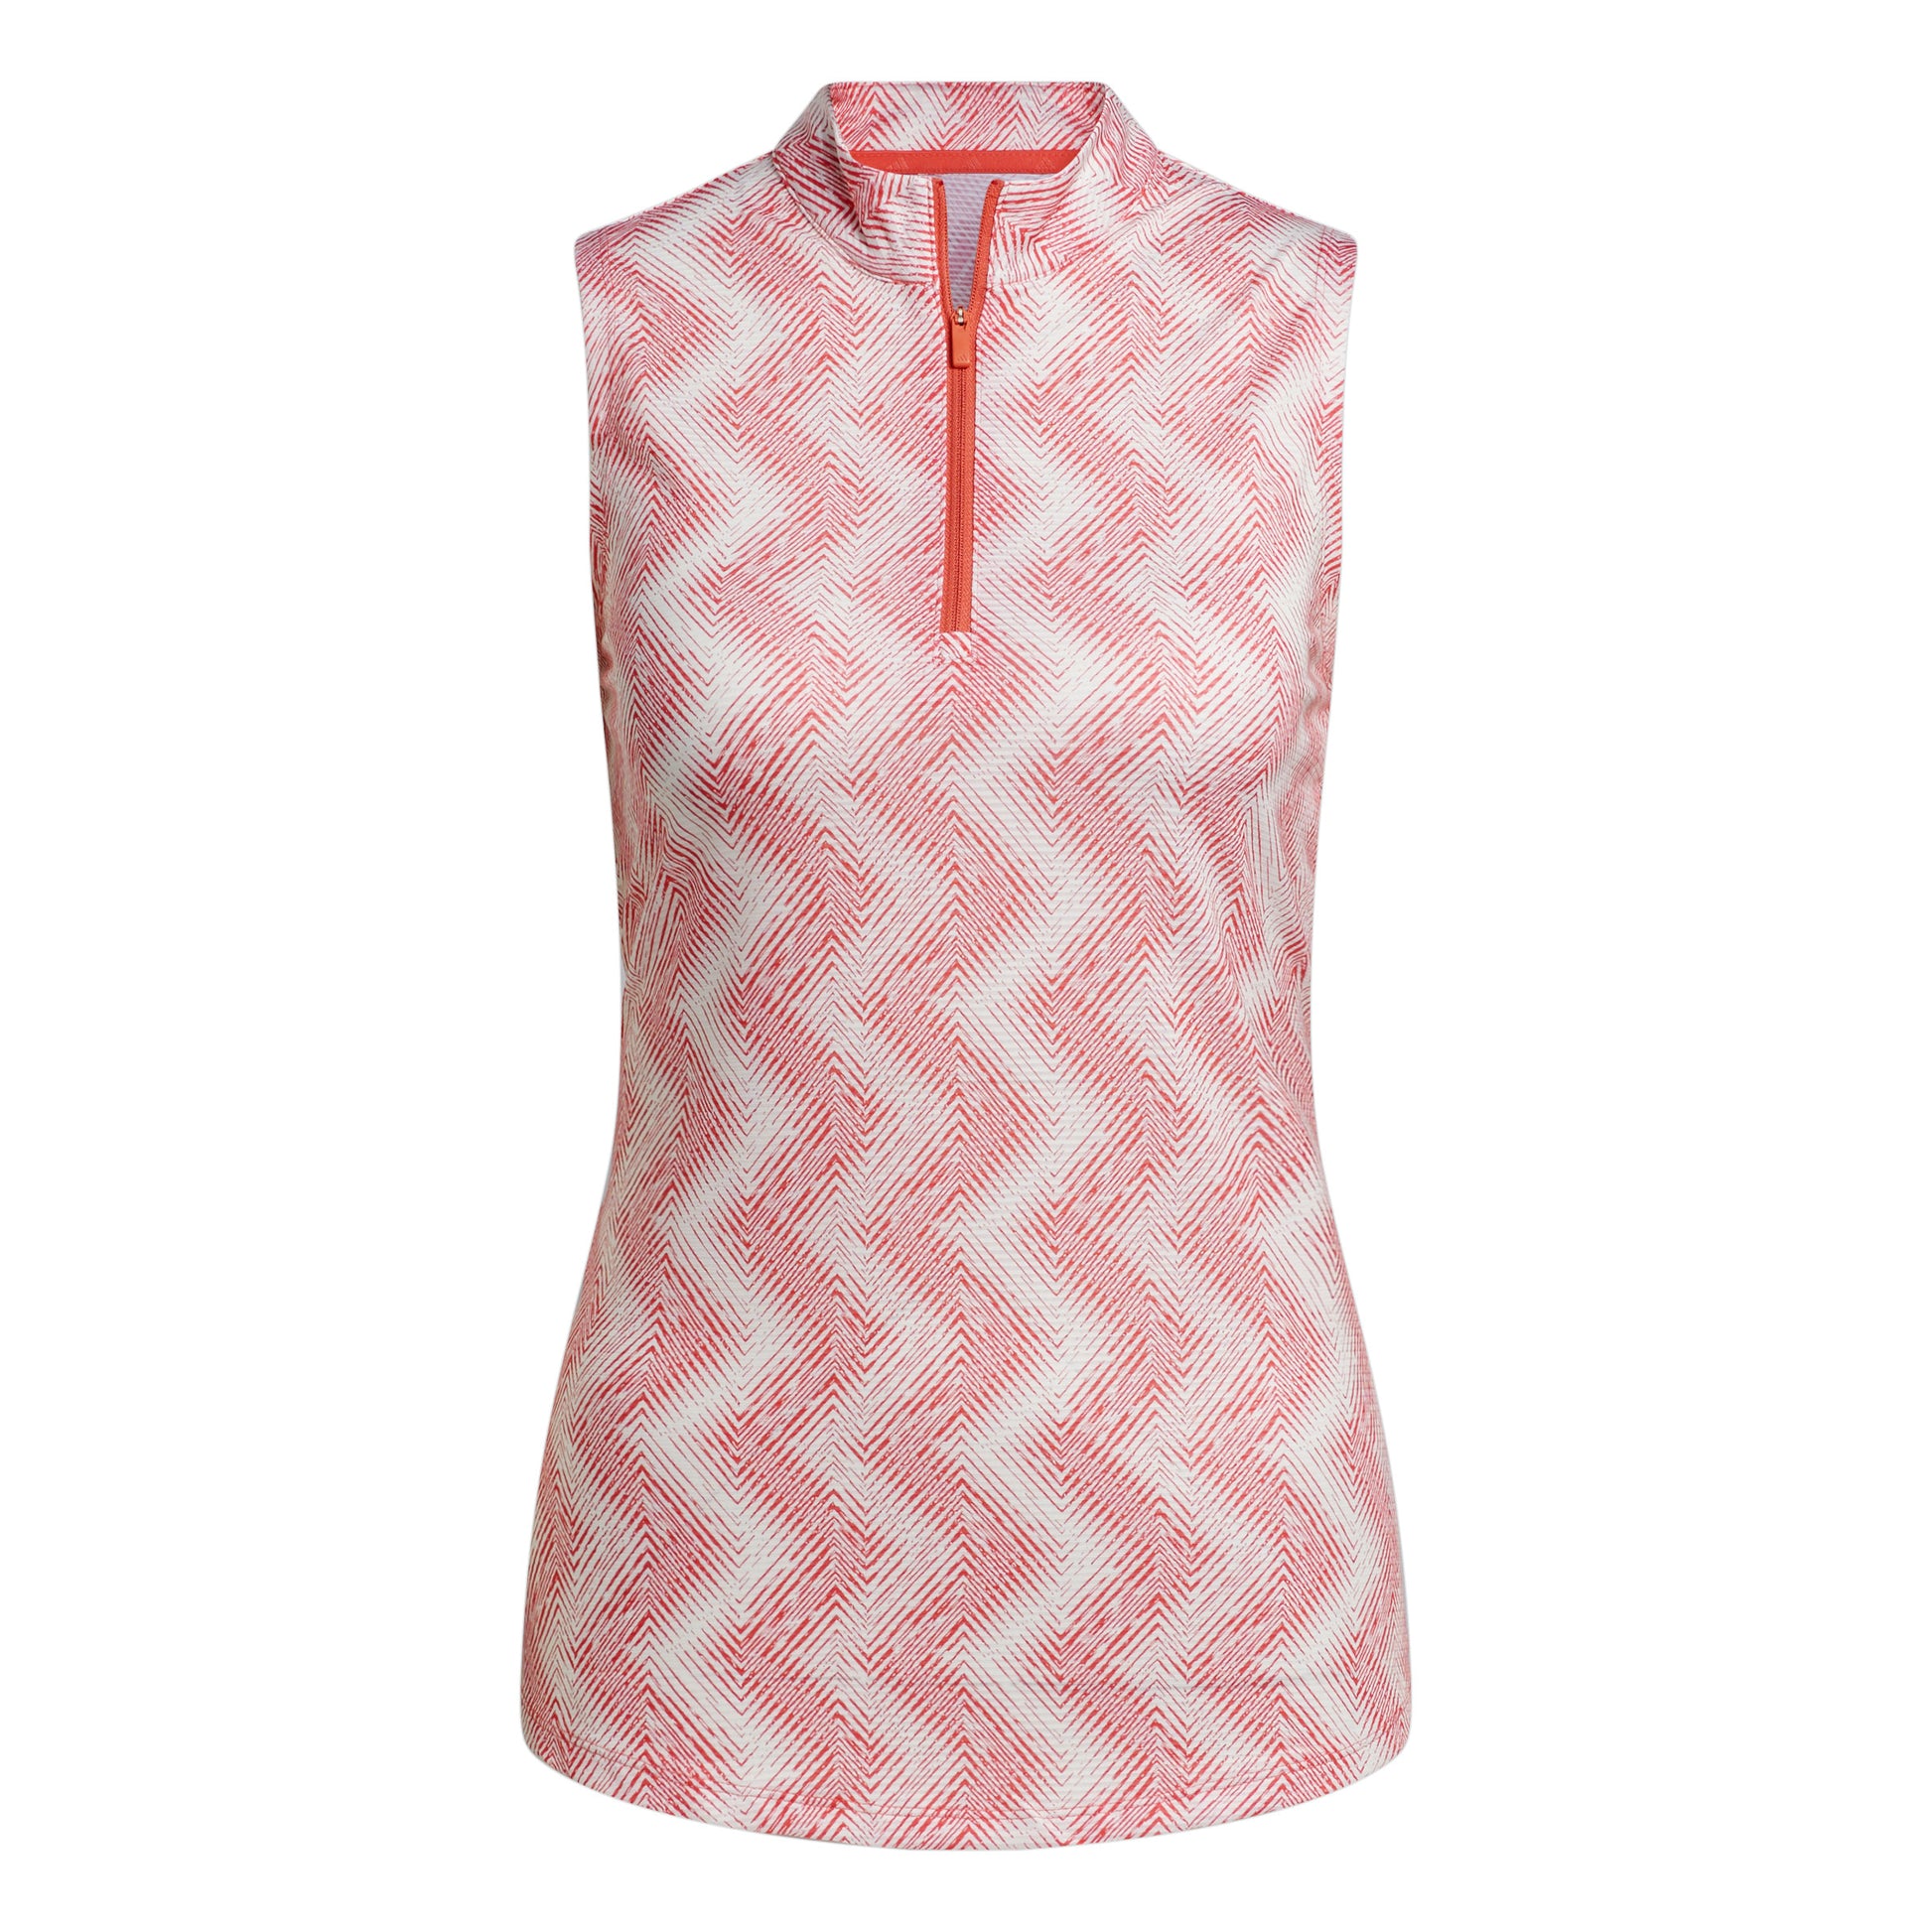 adidas Ladies Sleeveless Golf Polo with Abstract Zig-Zag Print in Preloved Scarlet